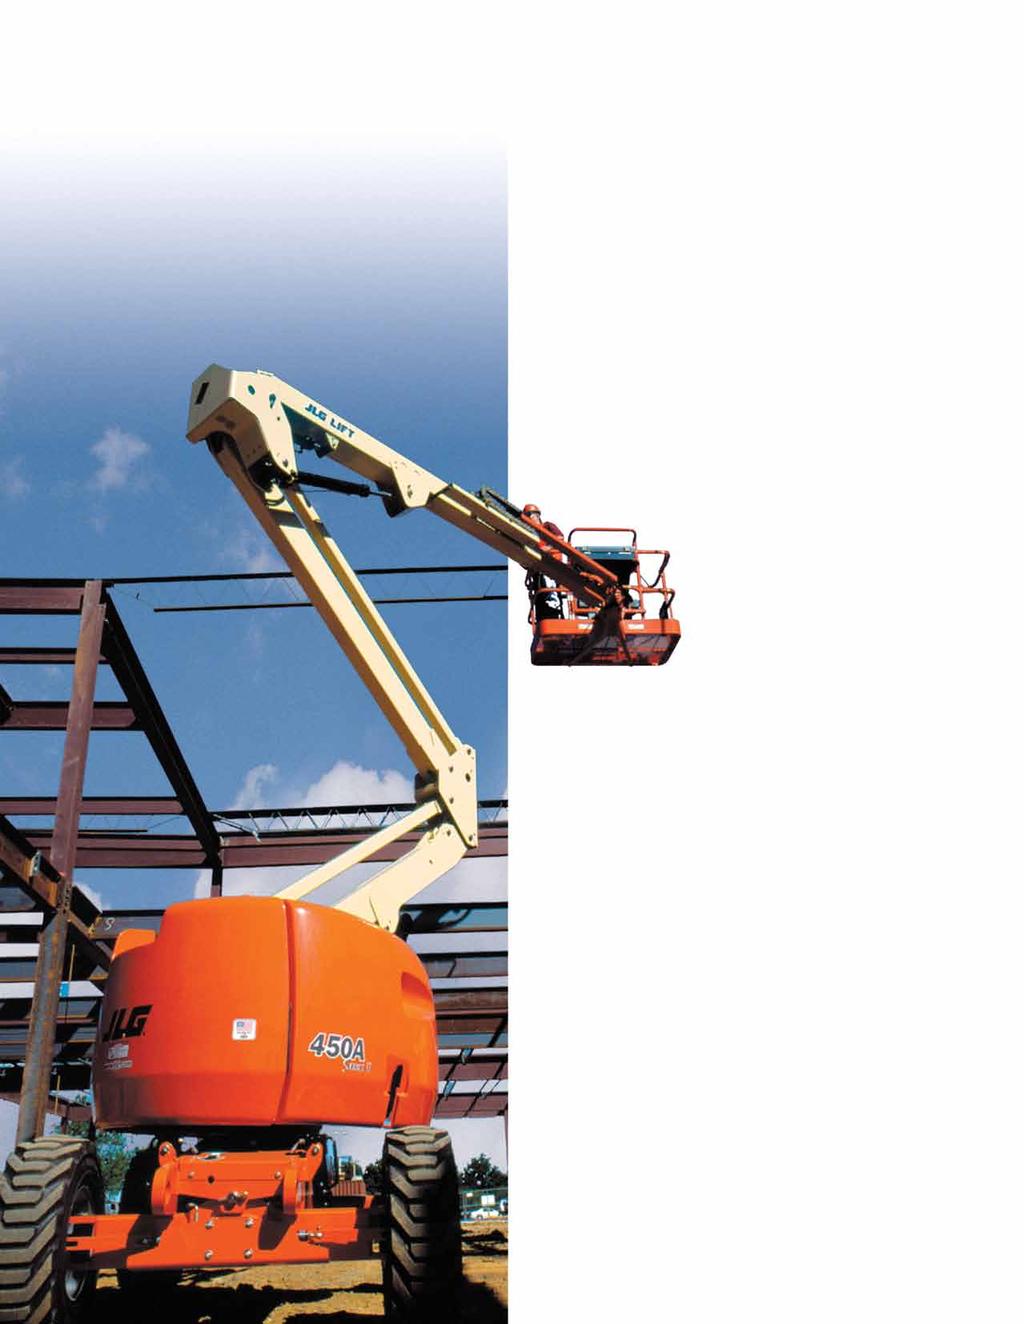 450 Series and Model 340AJ Articulating Boom Lifts Go Farther with a Wider Range of Motion.